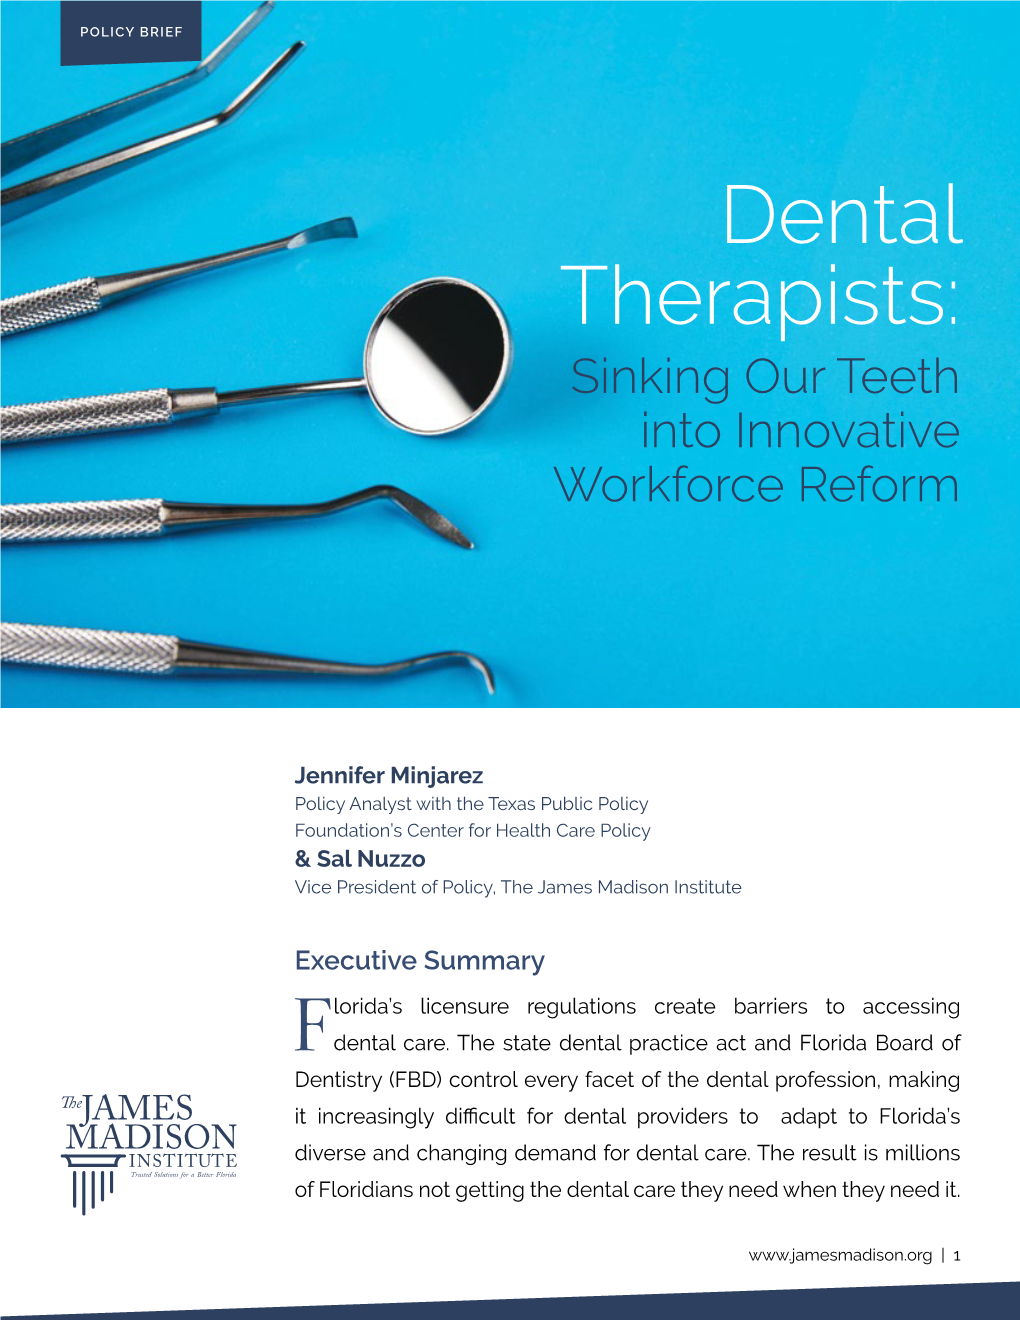 Dental Therapists: Sinking Our Teeth Into Innovative Workforce Reform